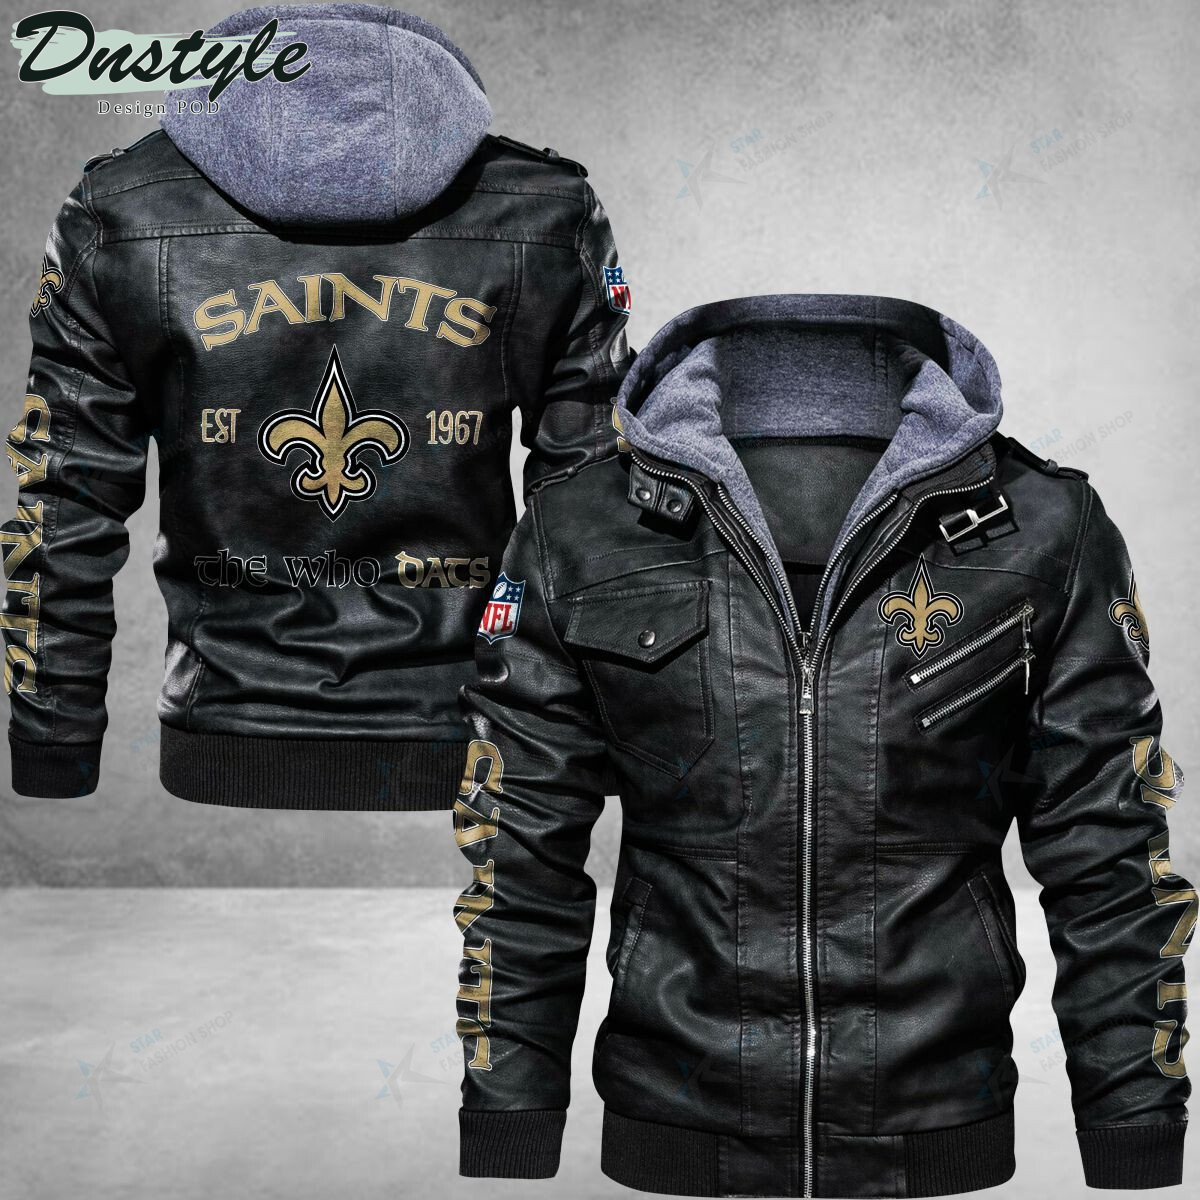 New Orleans Saints The Who Oats Leather Jacket